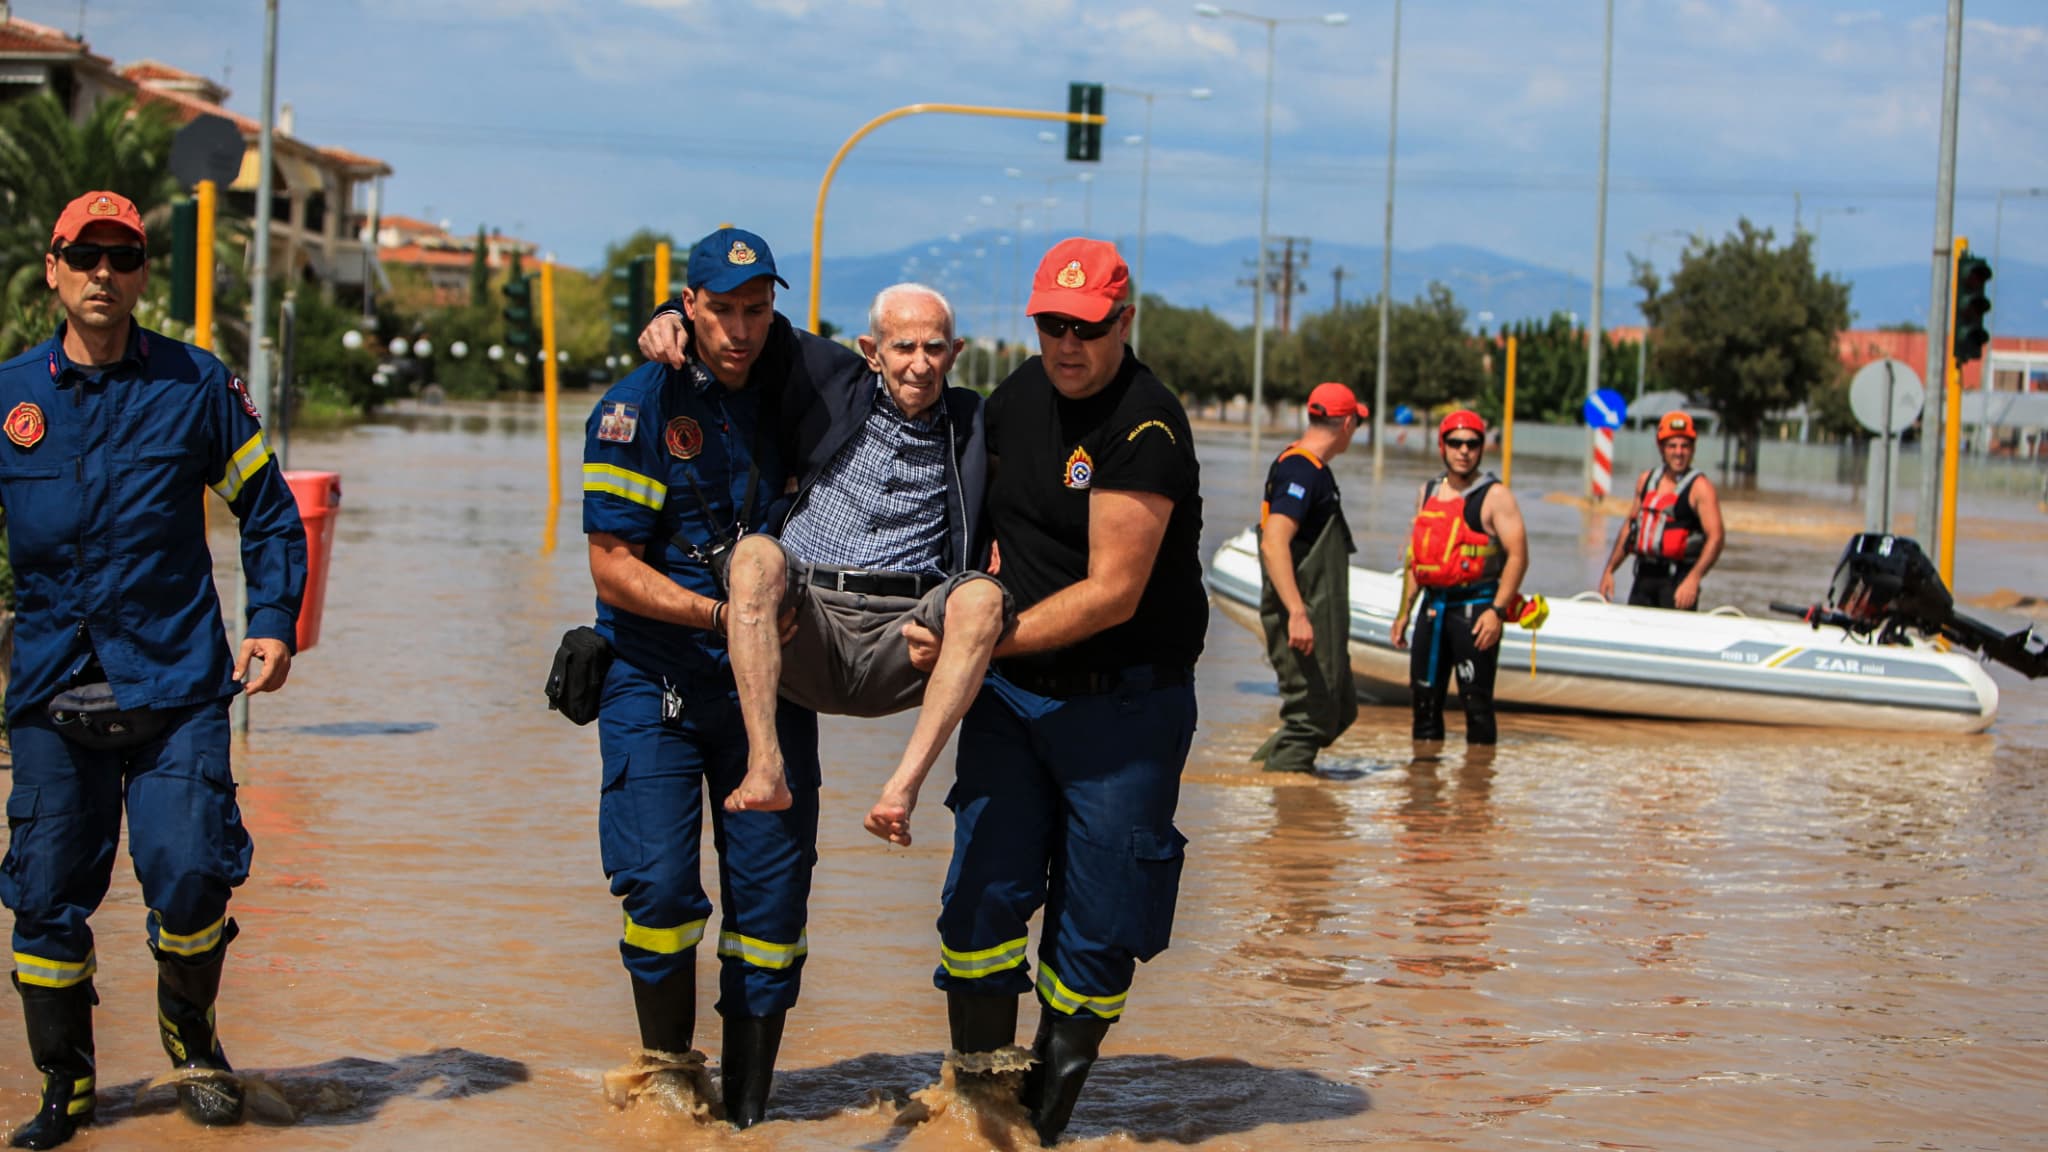 What is the situation in Greece after the floods?